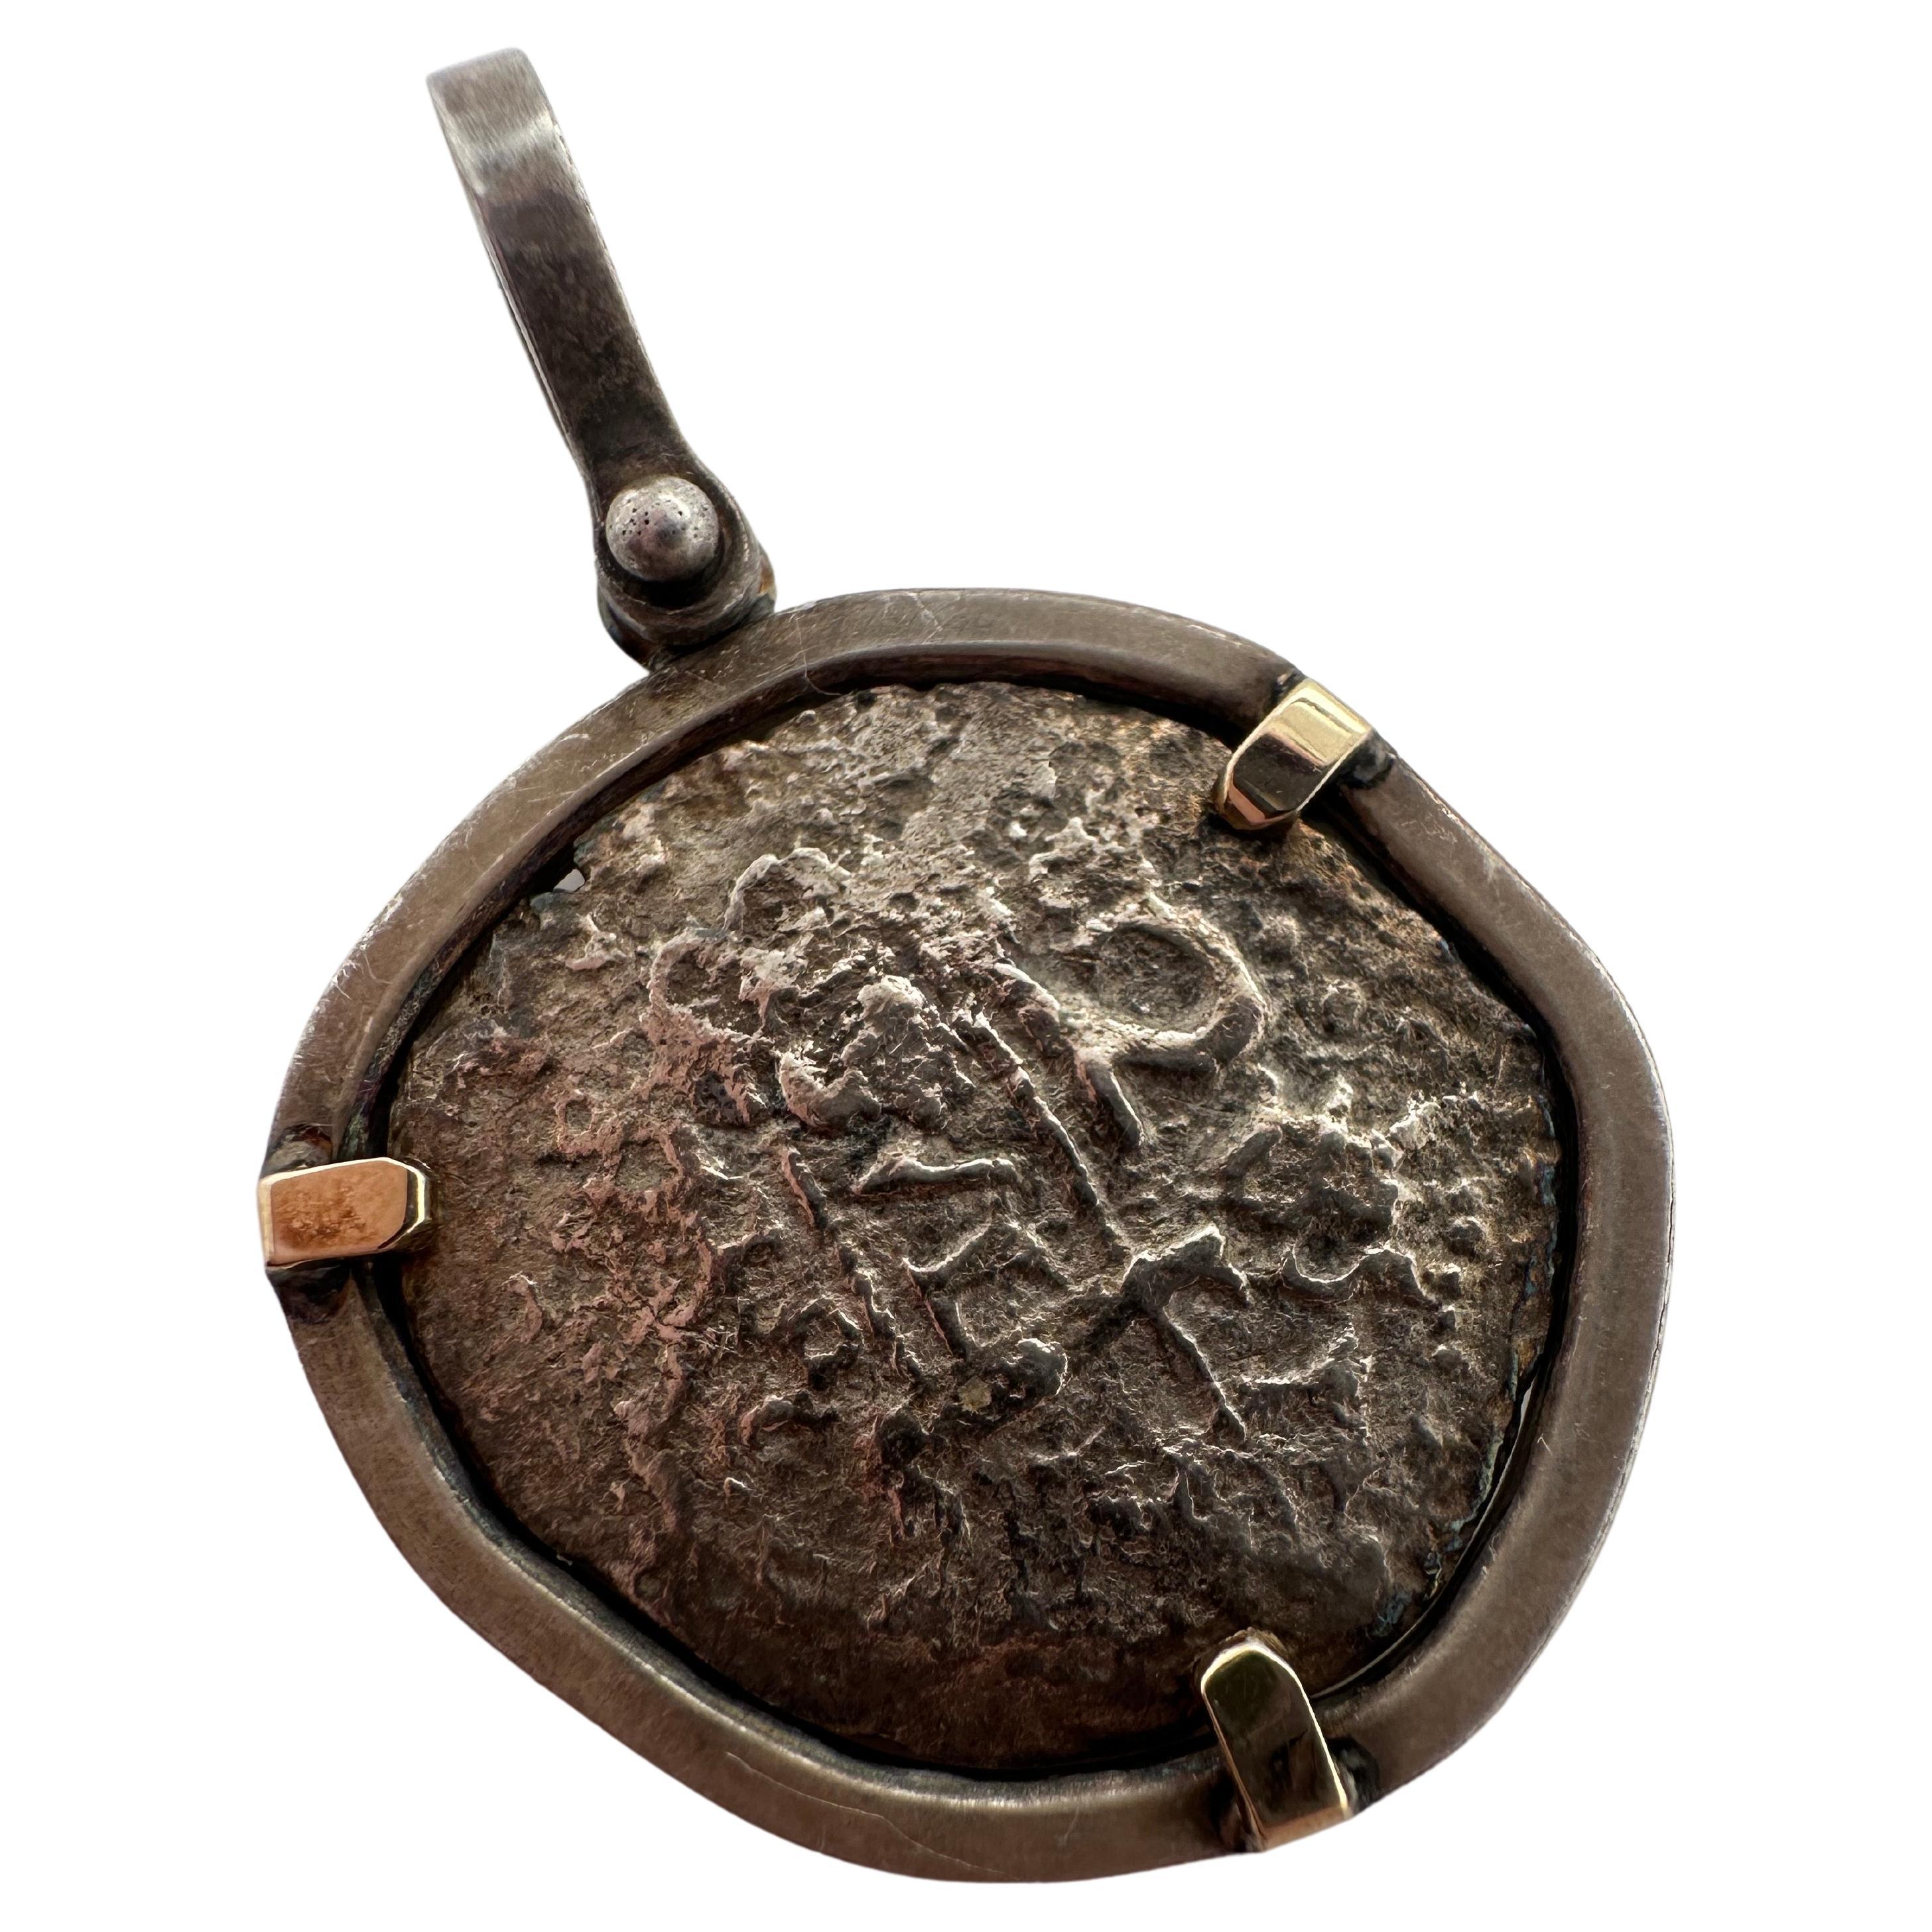 A very rare item to come across, this is a real authentic atocha coin, it has been passed through generations and finally landed in our office. It is authentic as you can see under microscope that the ornaments are worn out and not made, the metal